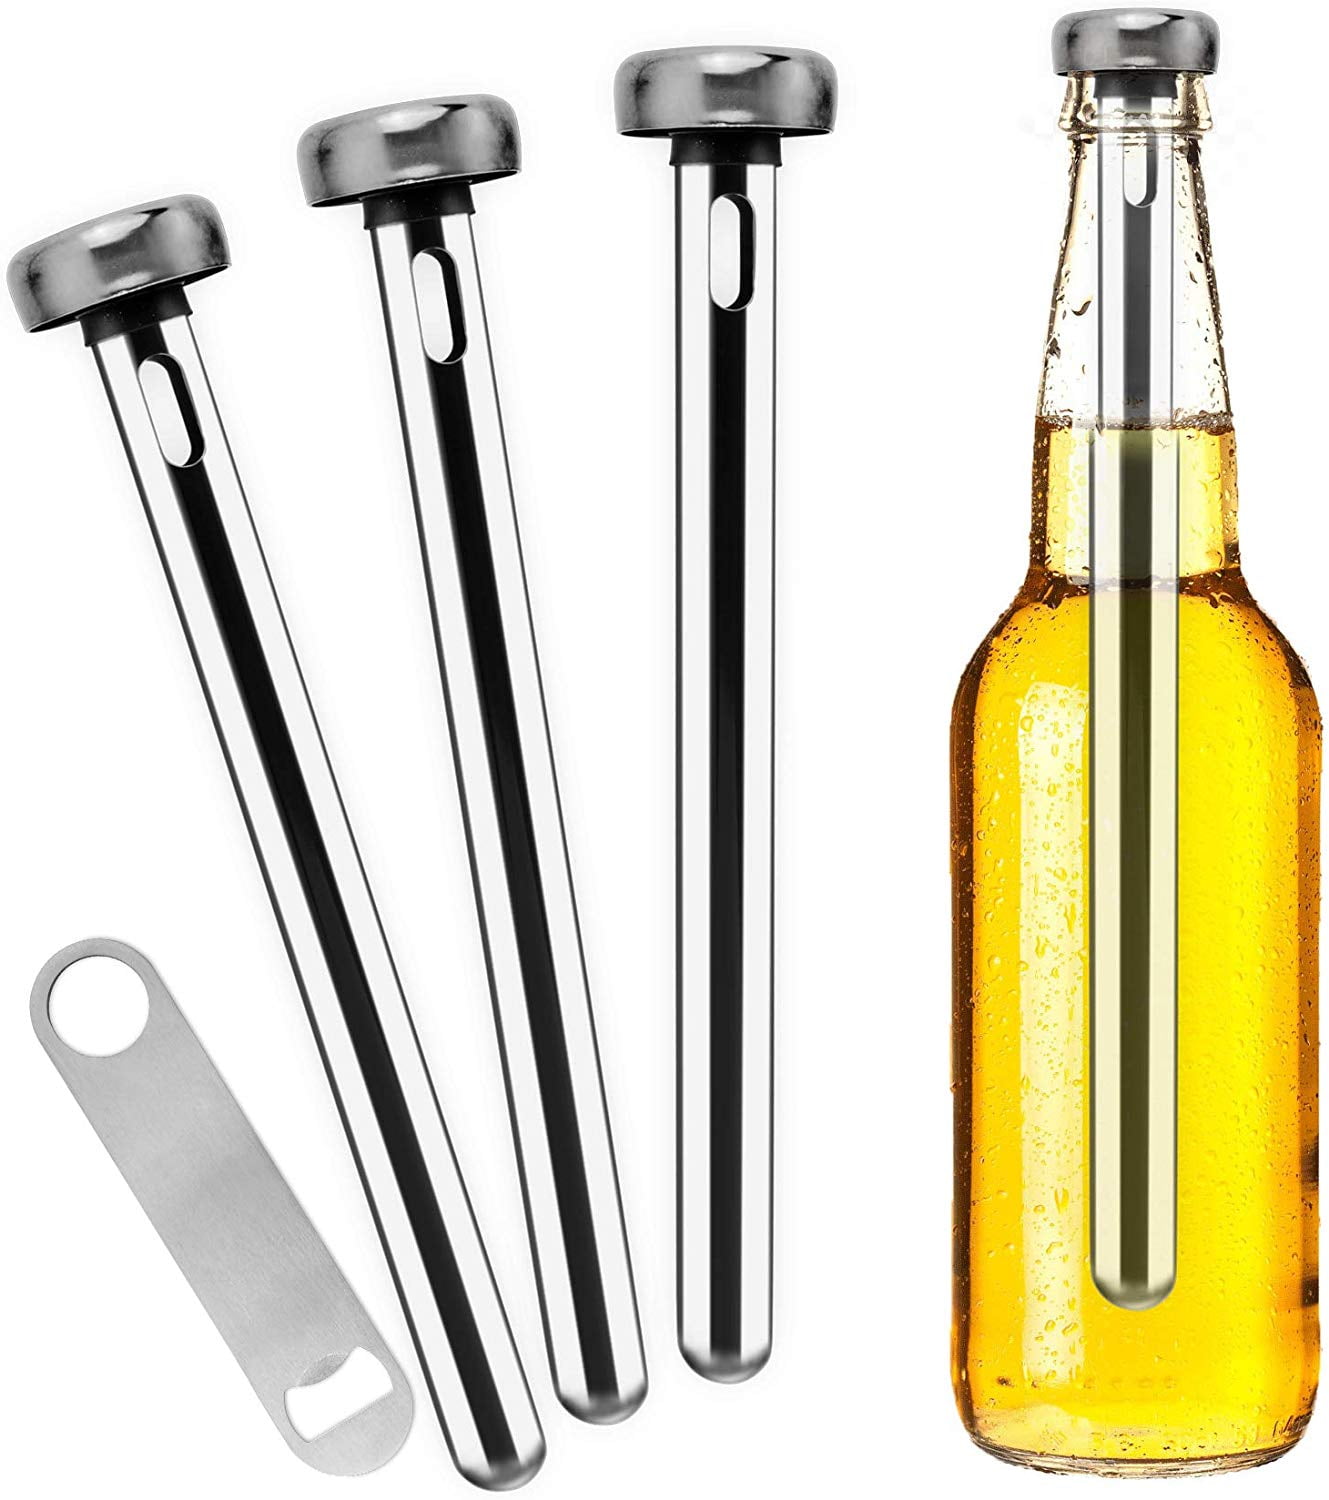 Stainless Steel Beer Chiller Stick Beverage Cooling Rod Cooler Frozen Tool Newly 